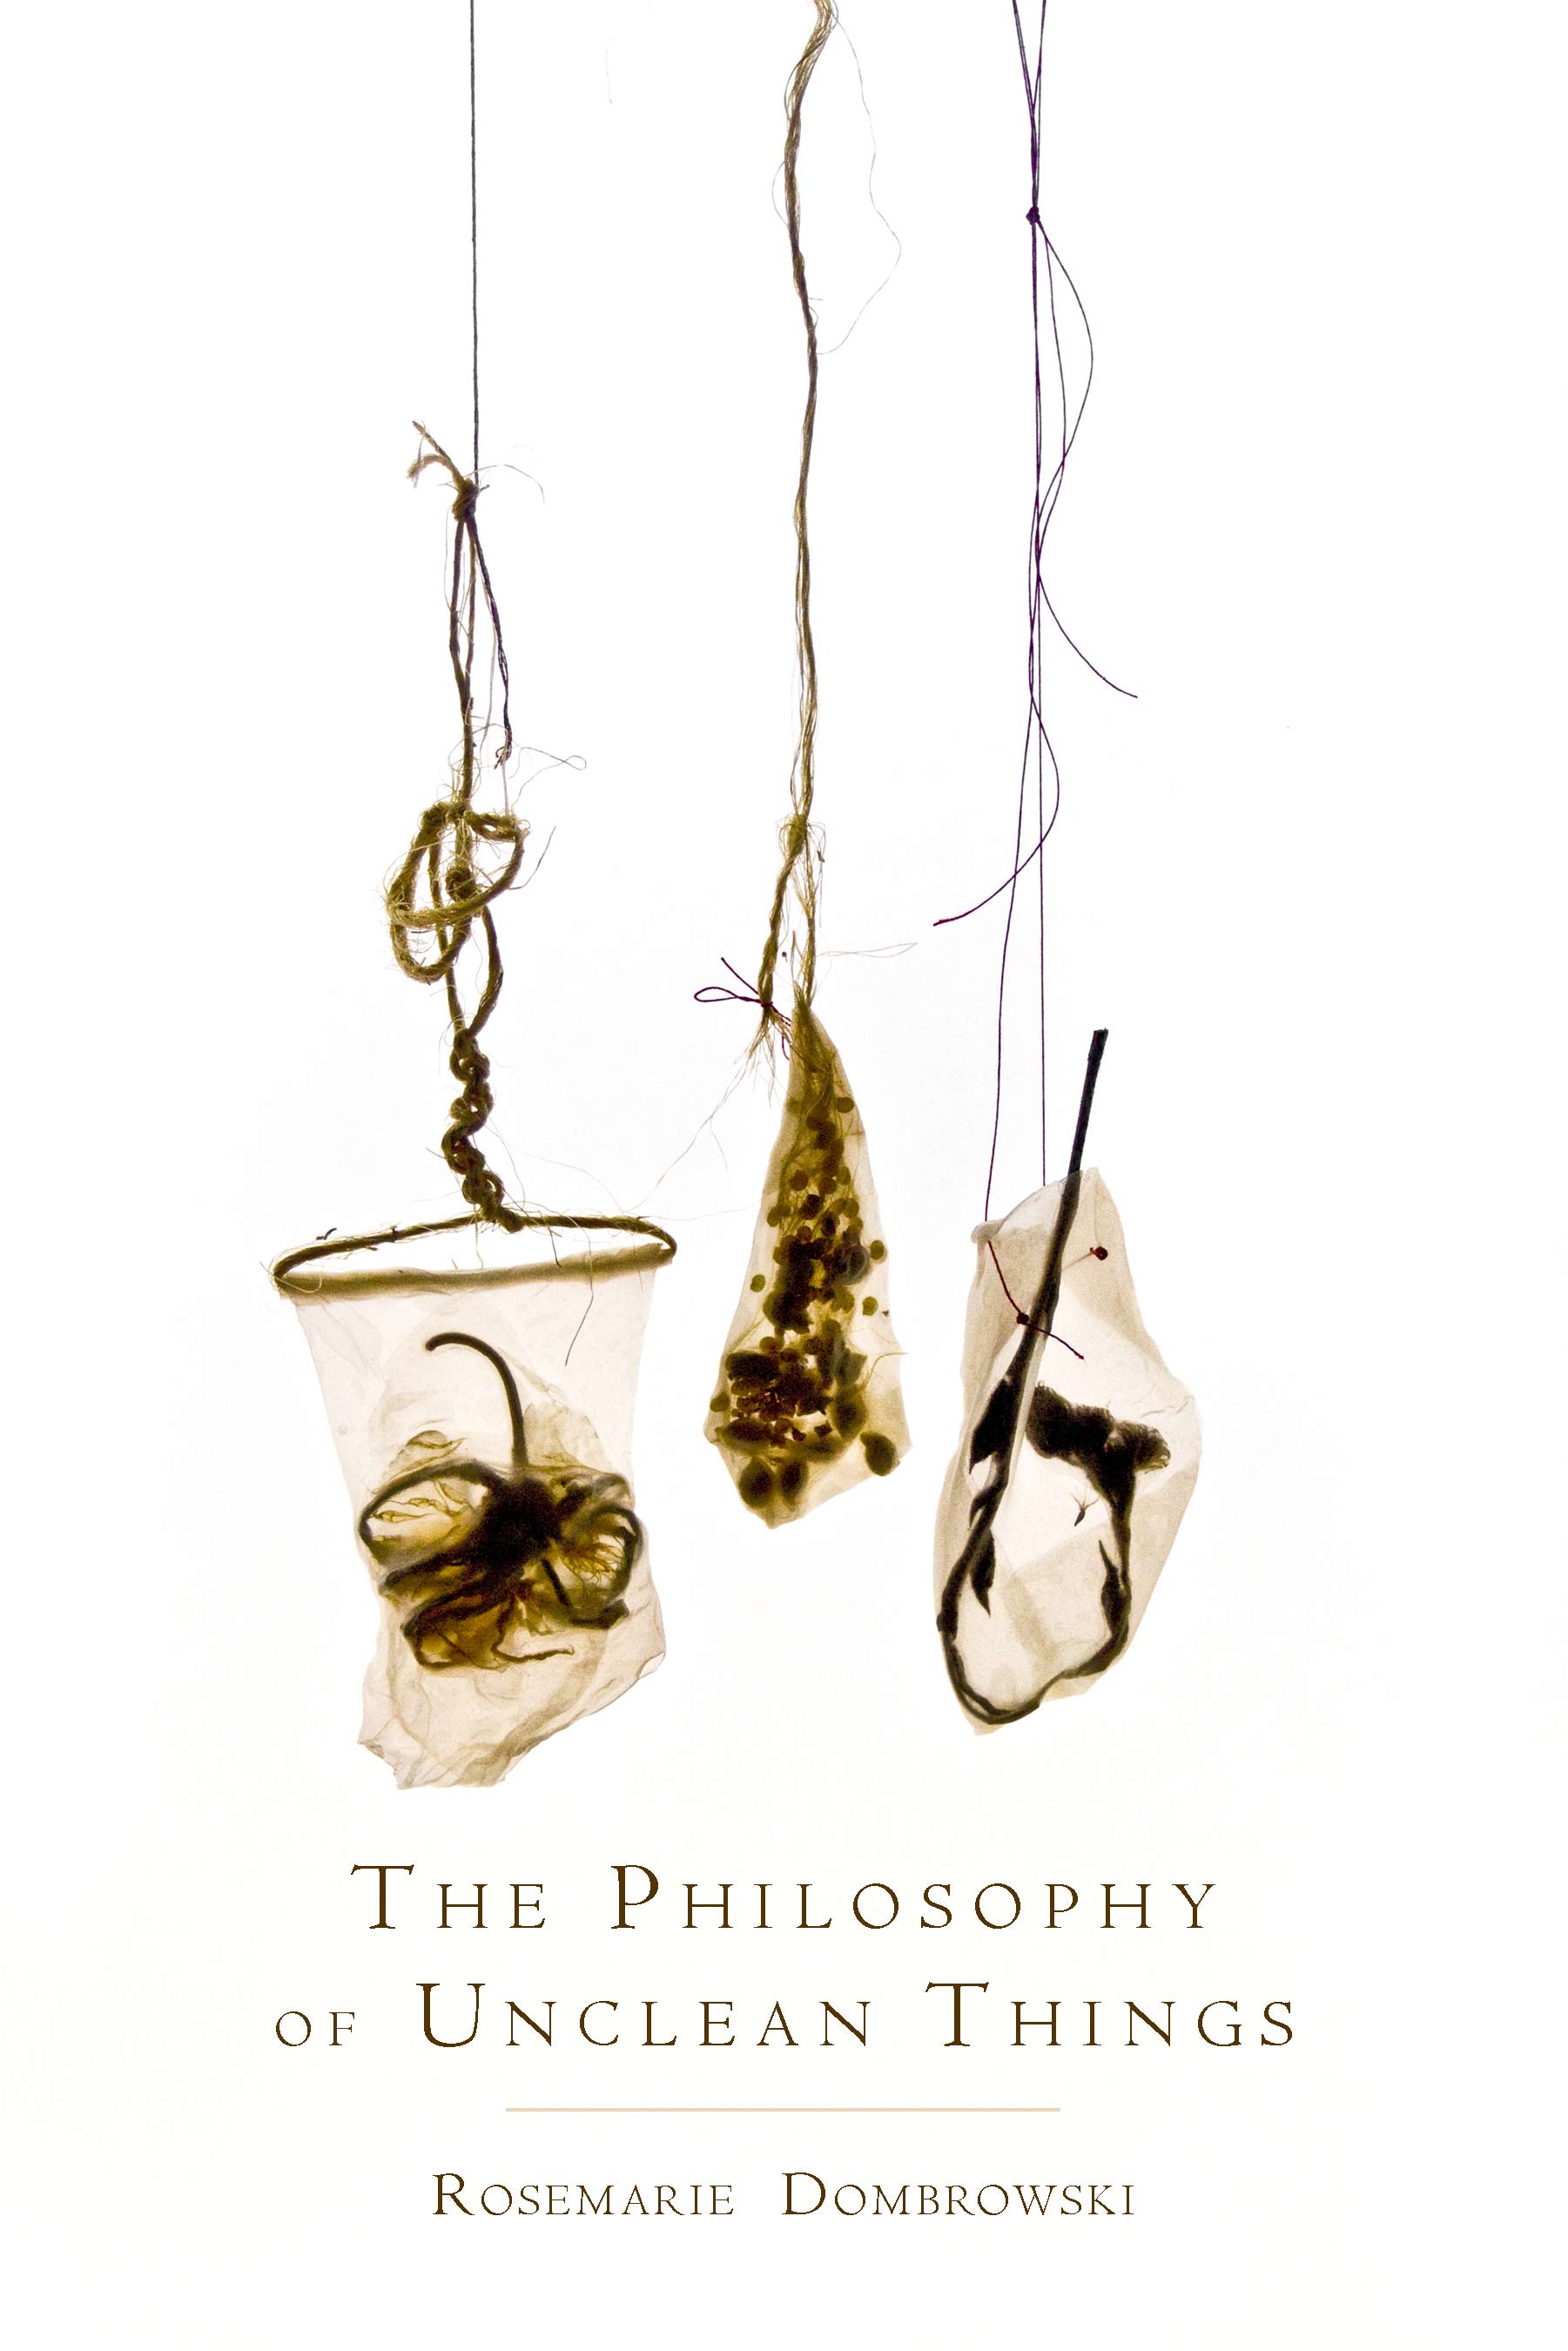 Cover art of The Philosophy of Unclean ThingsL Bags holding unrecognizable stuff